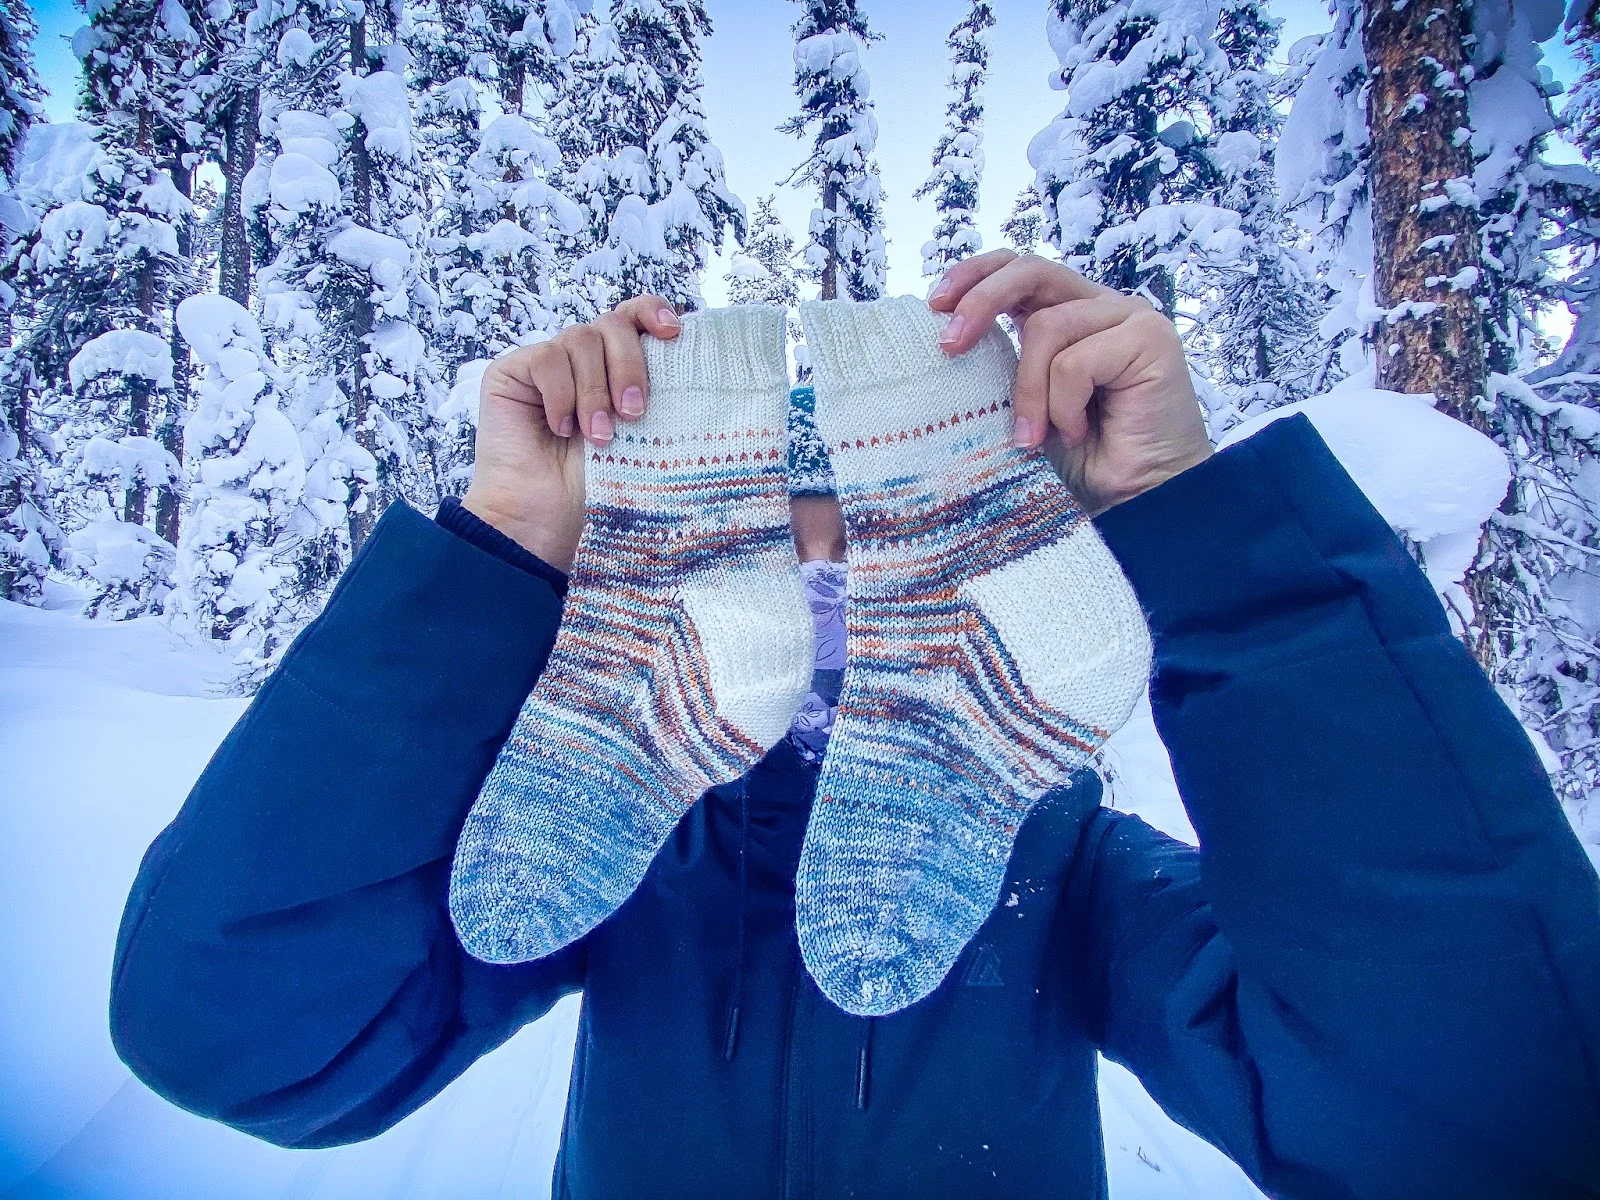 A person holds up two striped handknit socks in the middle of a snowy forest. The socks are knit with a gently variegated white, blue, and orange yarn, and the toes are pointing to the left.